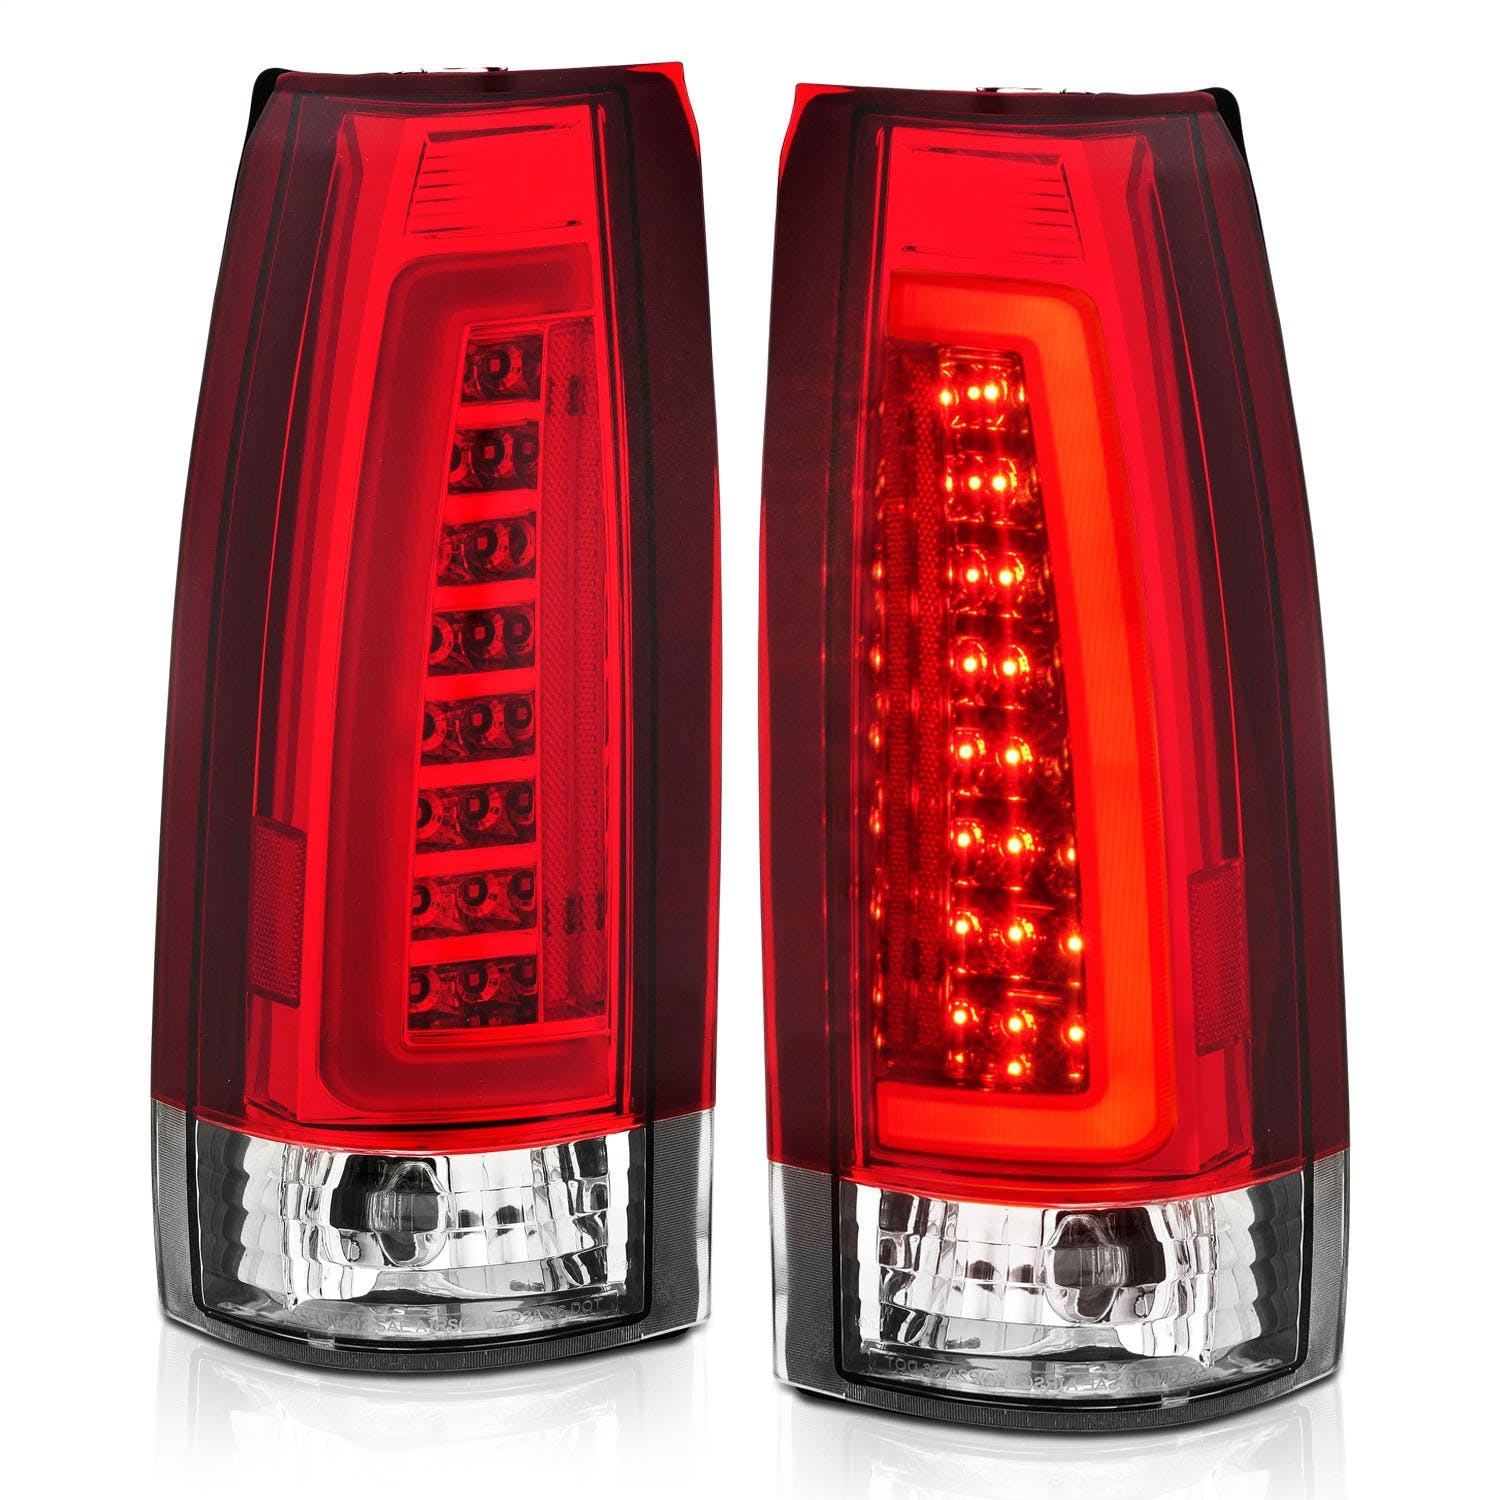 AnzoUSA 311346 LED Taillights Chrome Housing Red/Clear Lens